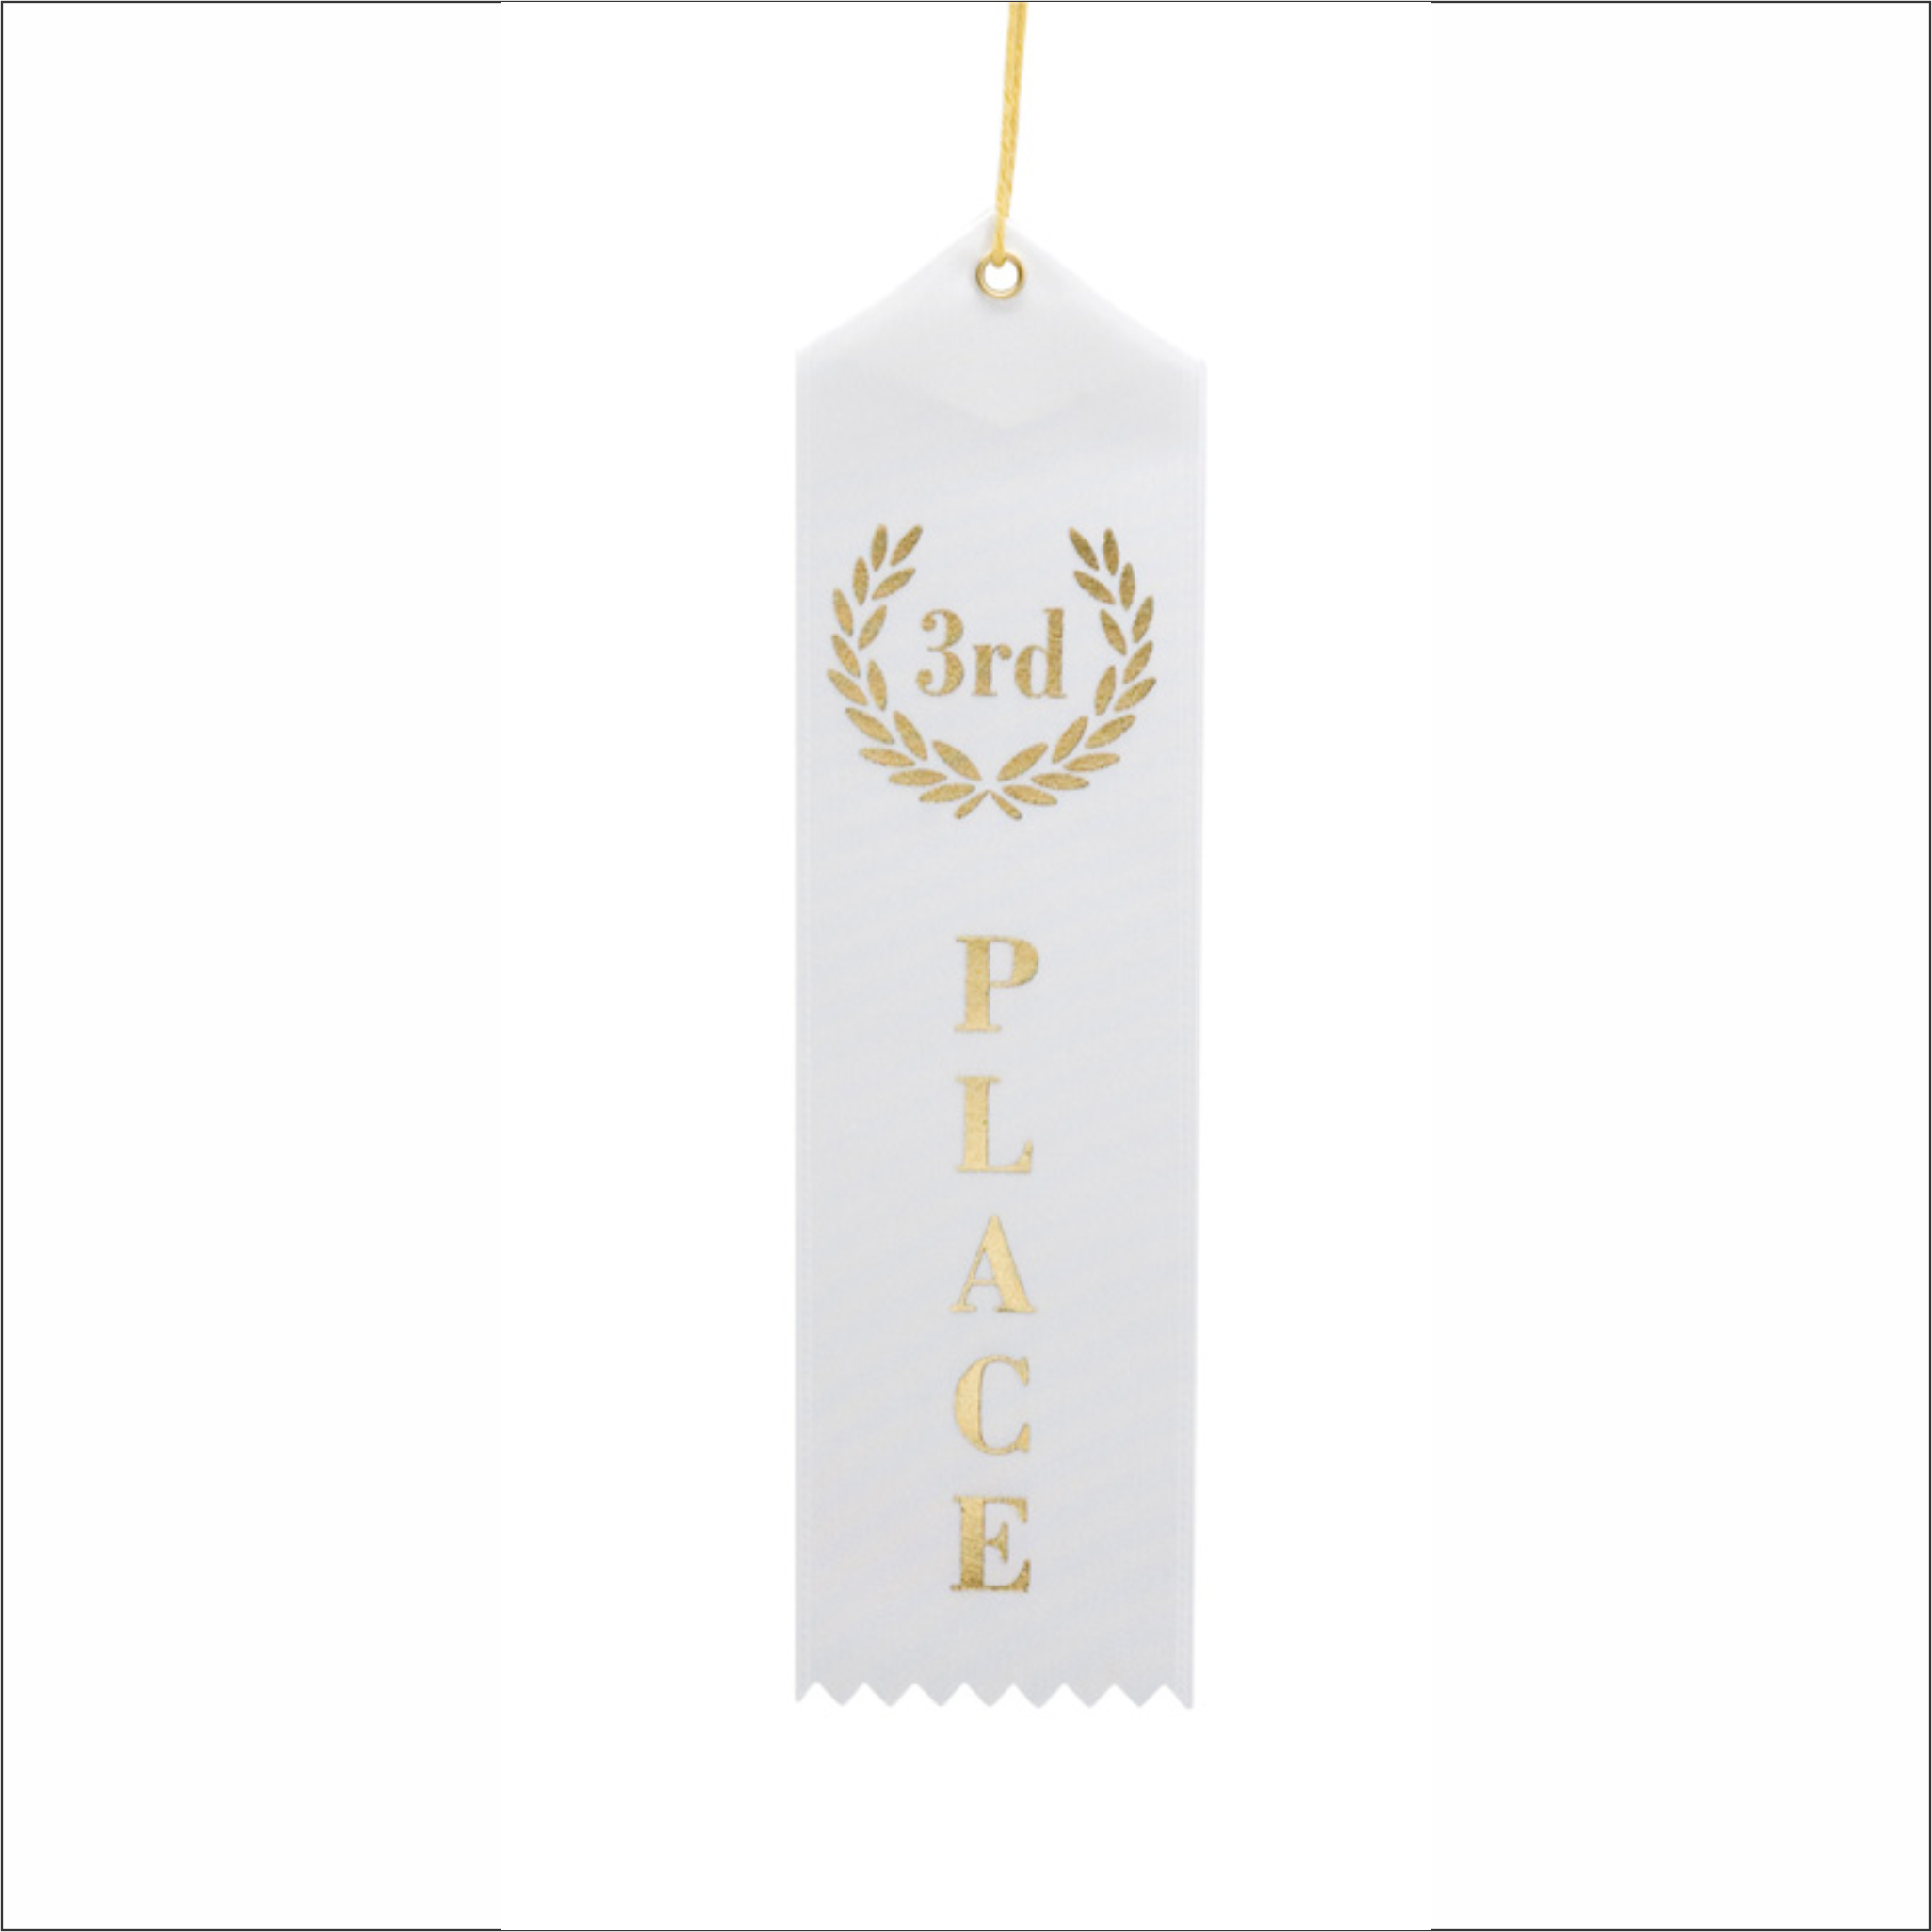 Third Place Ribbons - Pack of 25 - SR-1000 series